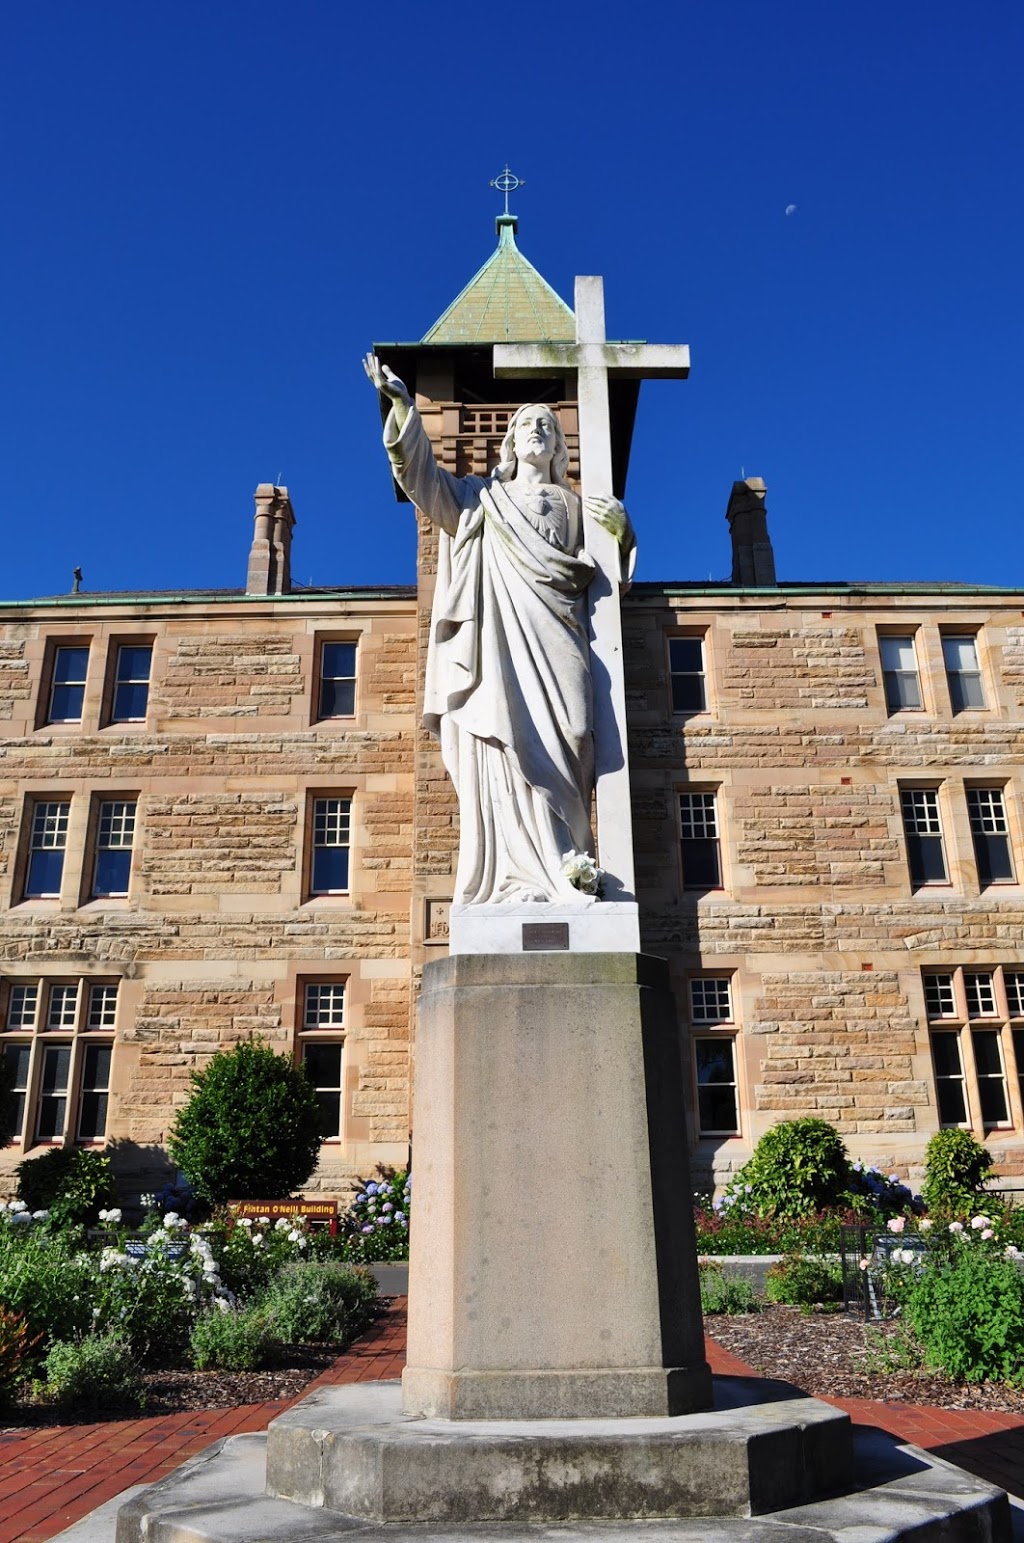 Holy Cross College | school | 517 Victoria Rd, Ryde NSW 2112, Australia | 0298081033 OR +61 2 9808 1033